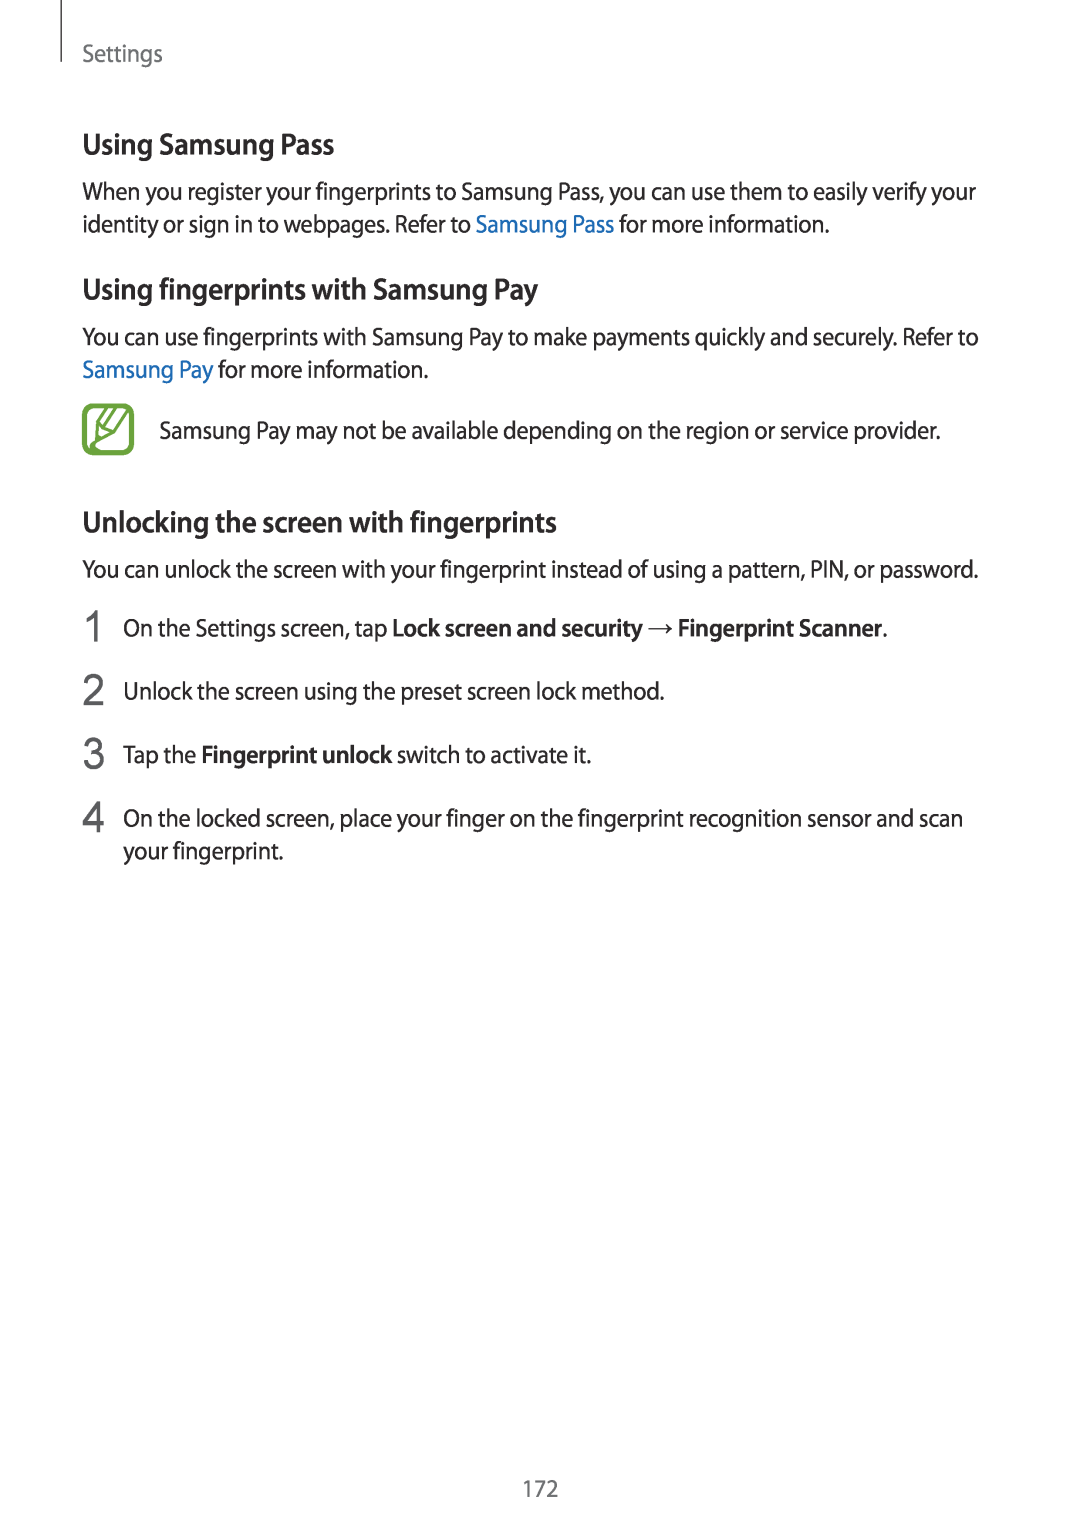 Samsung SM-A530FZVDCYV Using Samsung Pass, Using fingerprints with Samsung Pay, Unlocking the screen with fingerprints 